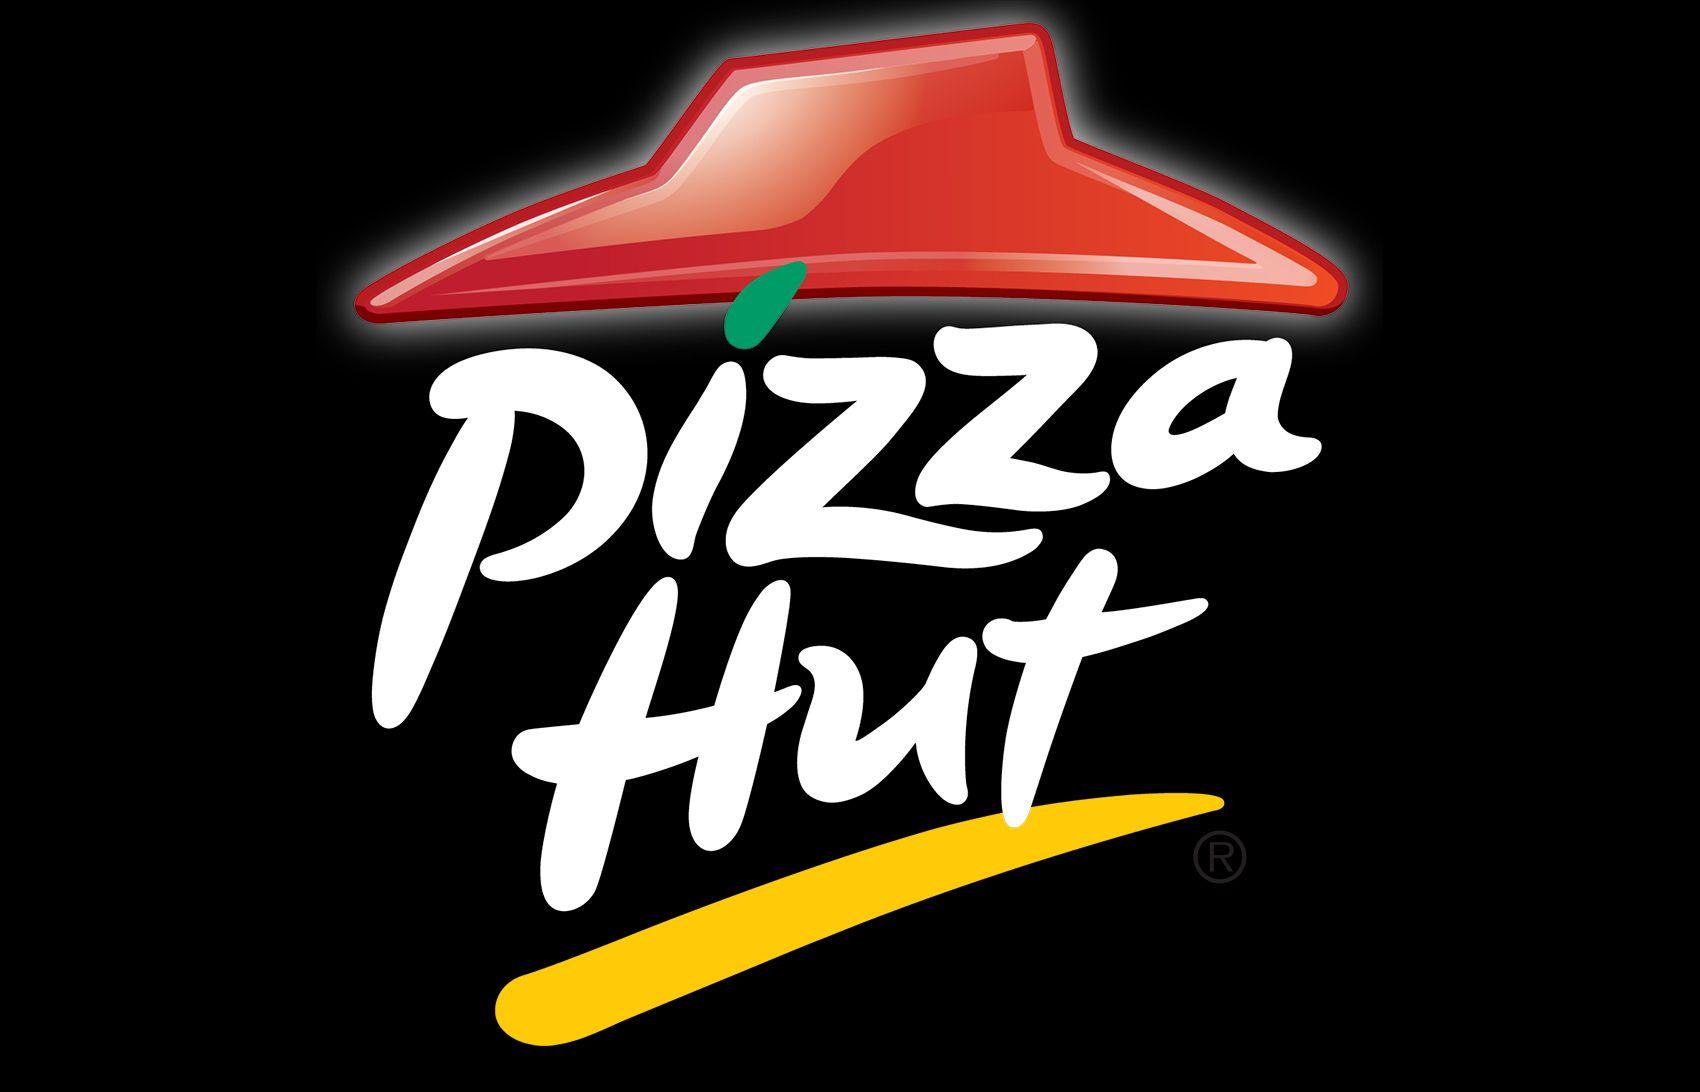 Pizza Hut Logo - Pizza Hut Logo, Pizza Hut Symbol, Meaning, History and Evolution